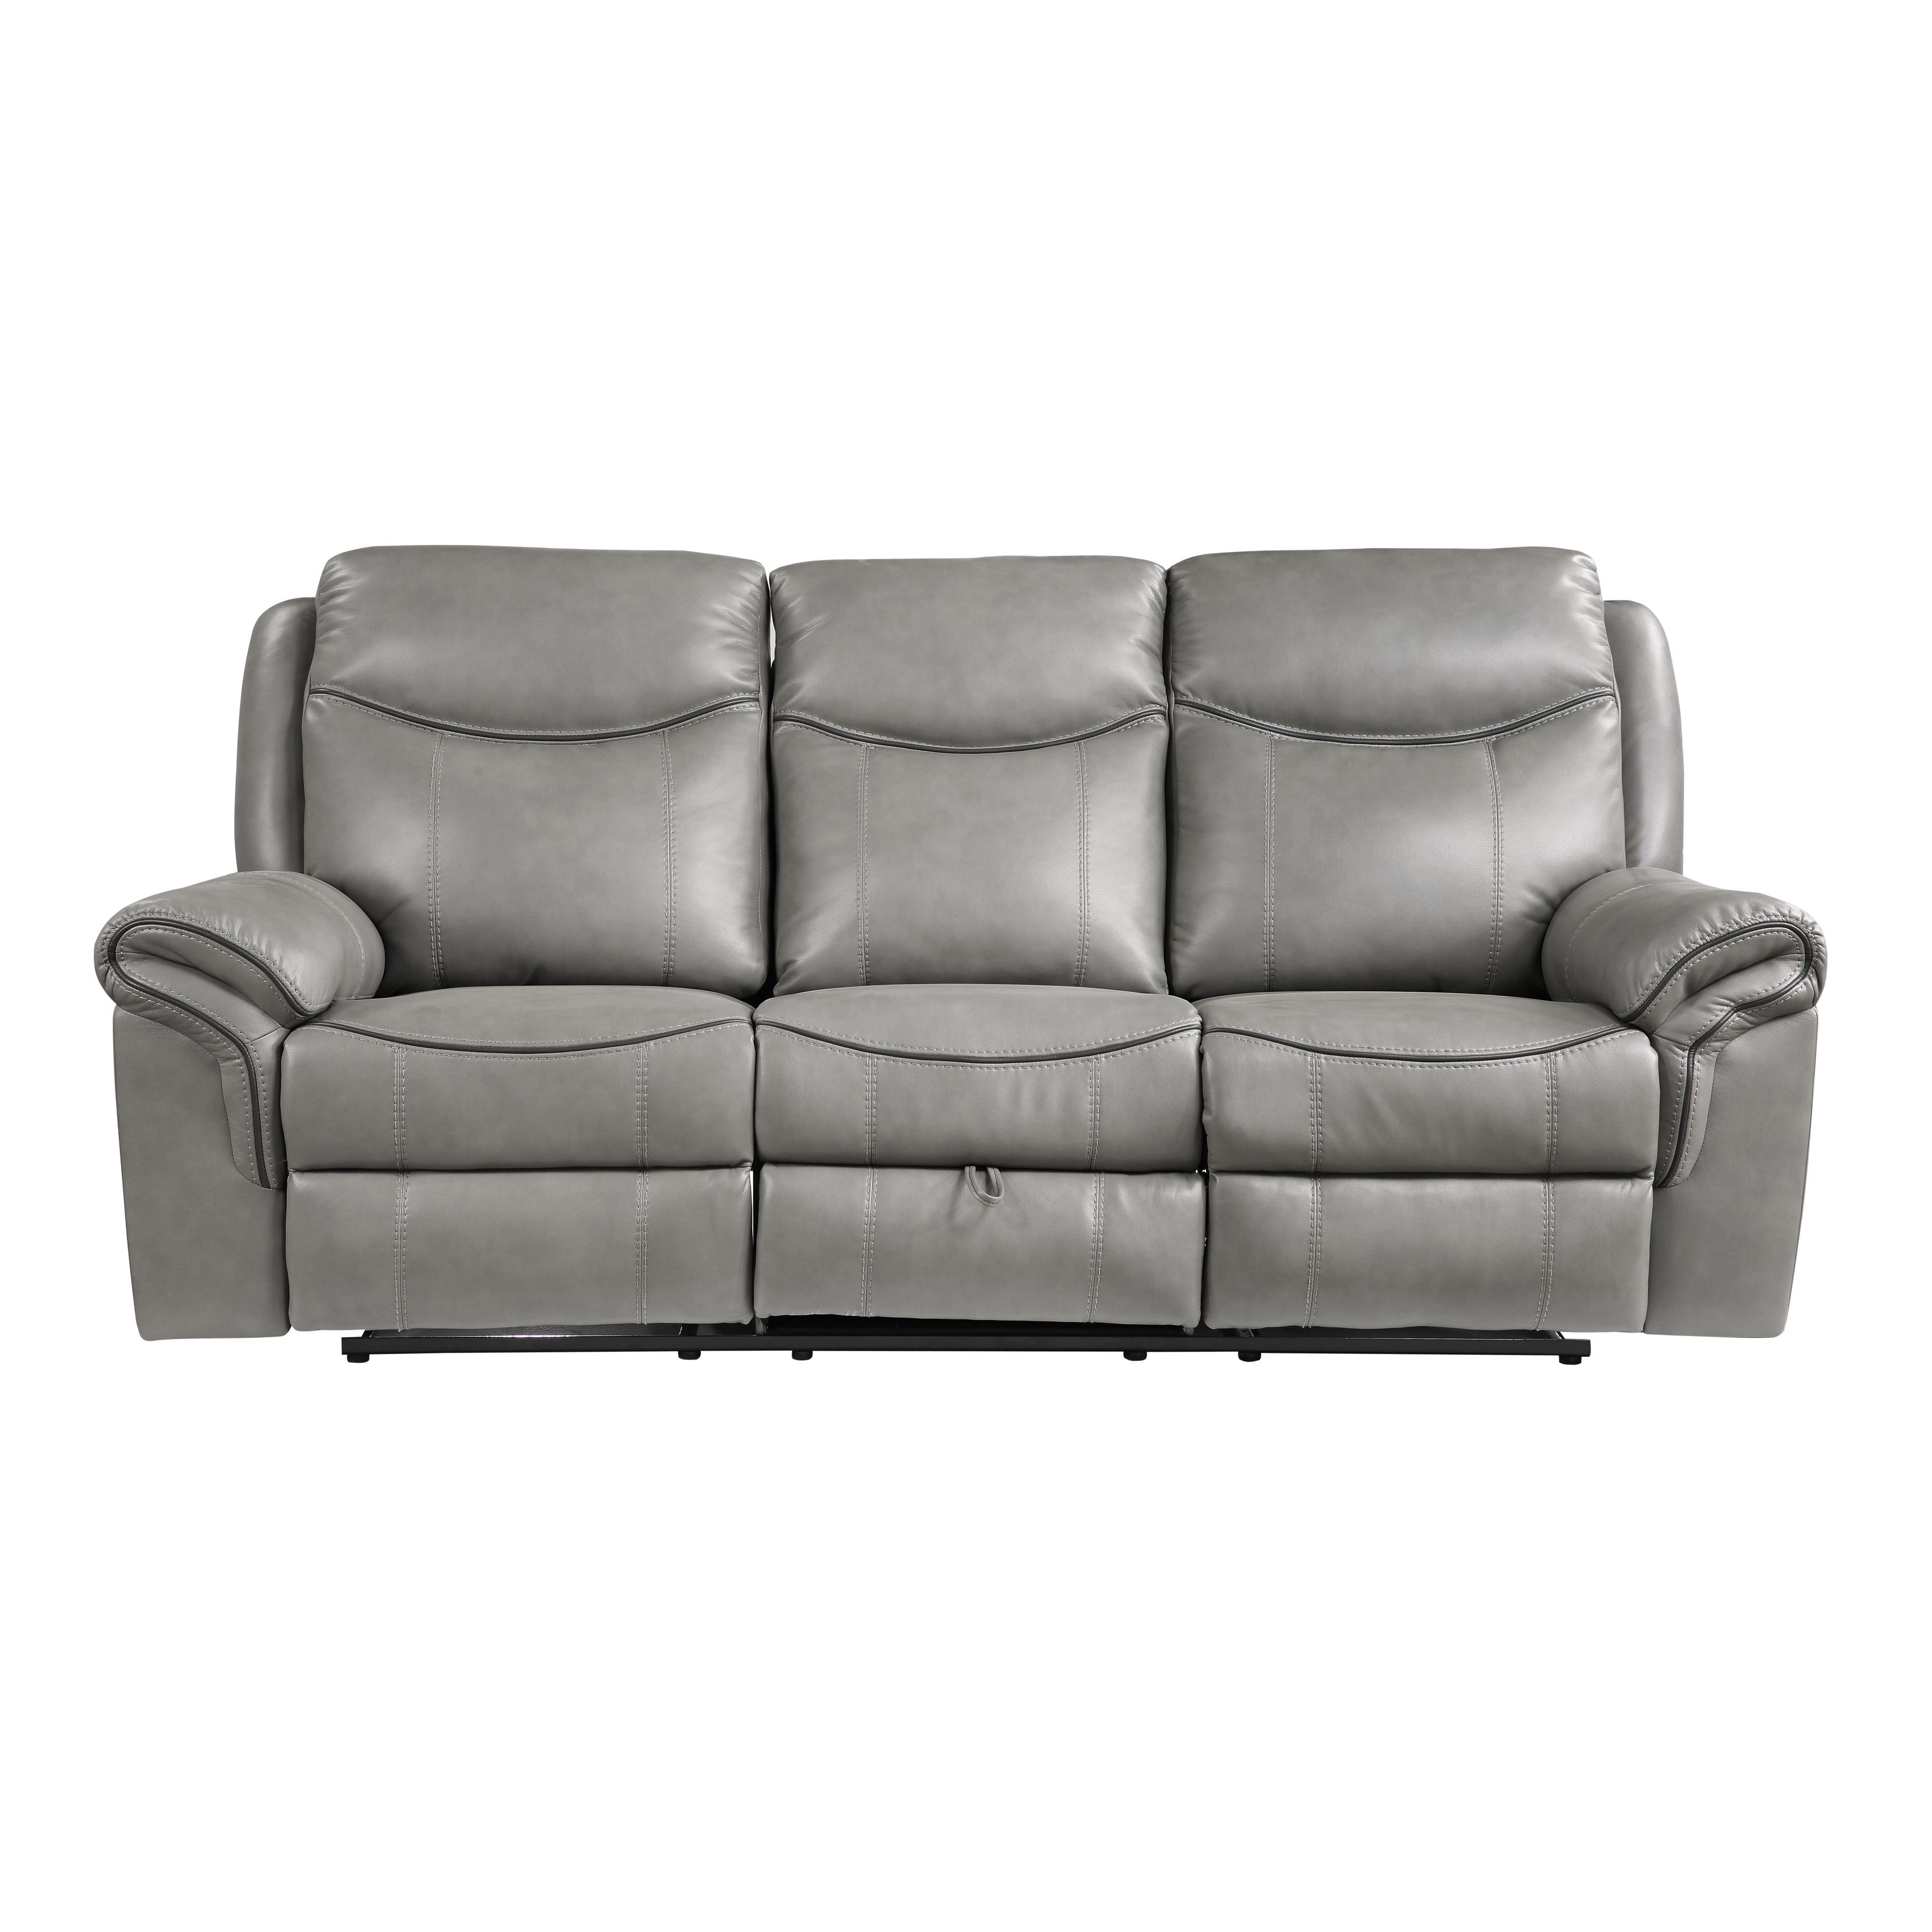 Transitional Reclining Sofa 8206GRY-3 Aram 8206GRY-3 in Gray Faux Leather